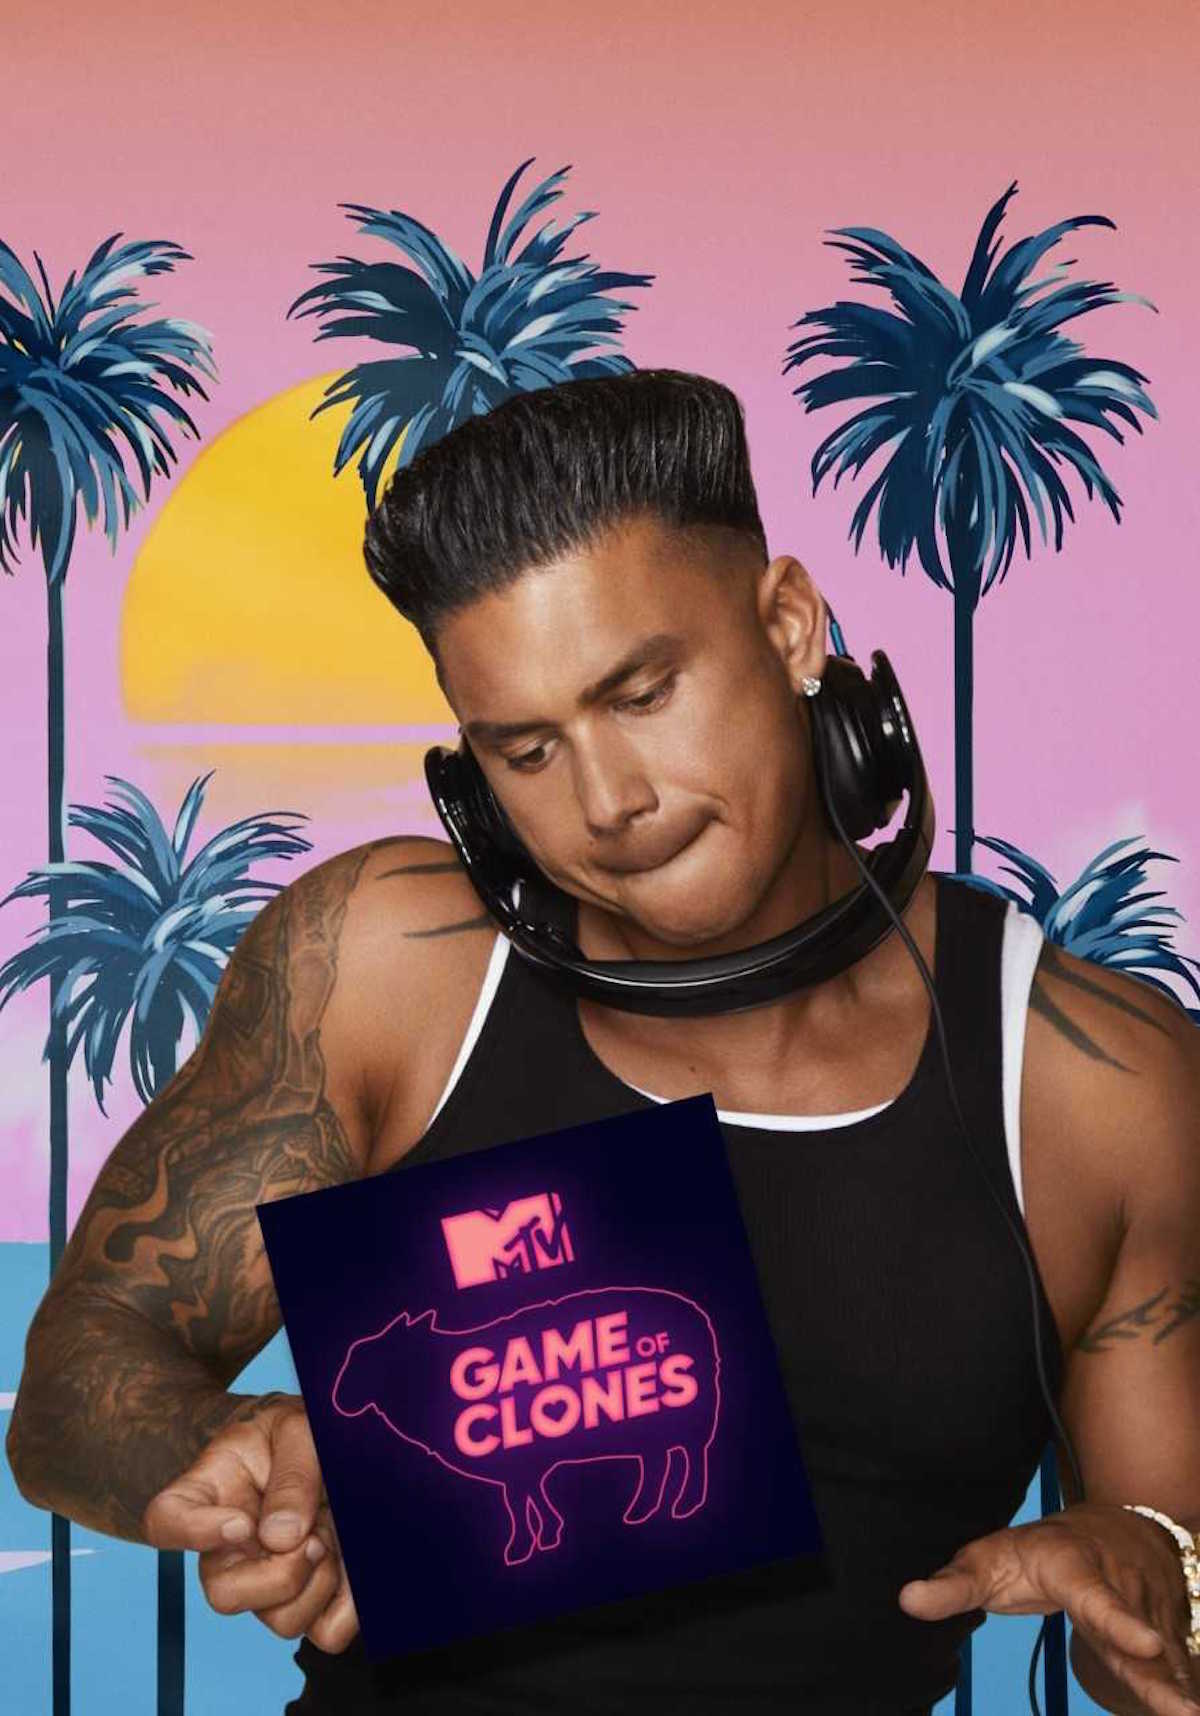 Pauly D on MTV's "Game of Clones"